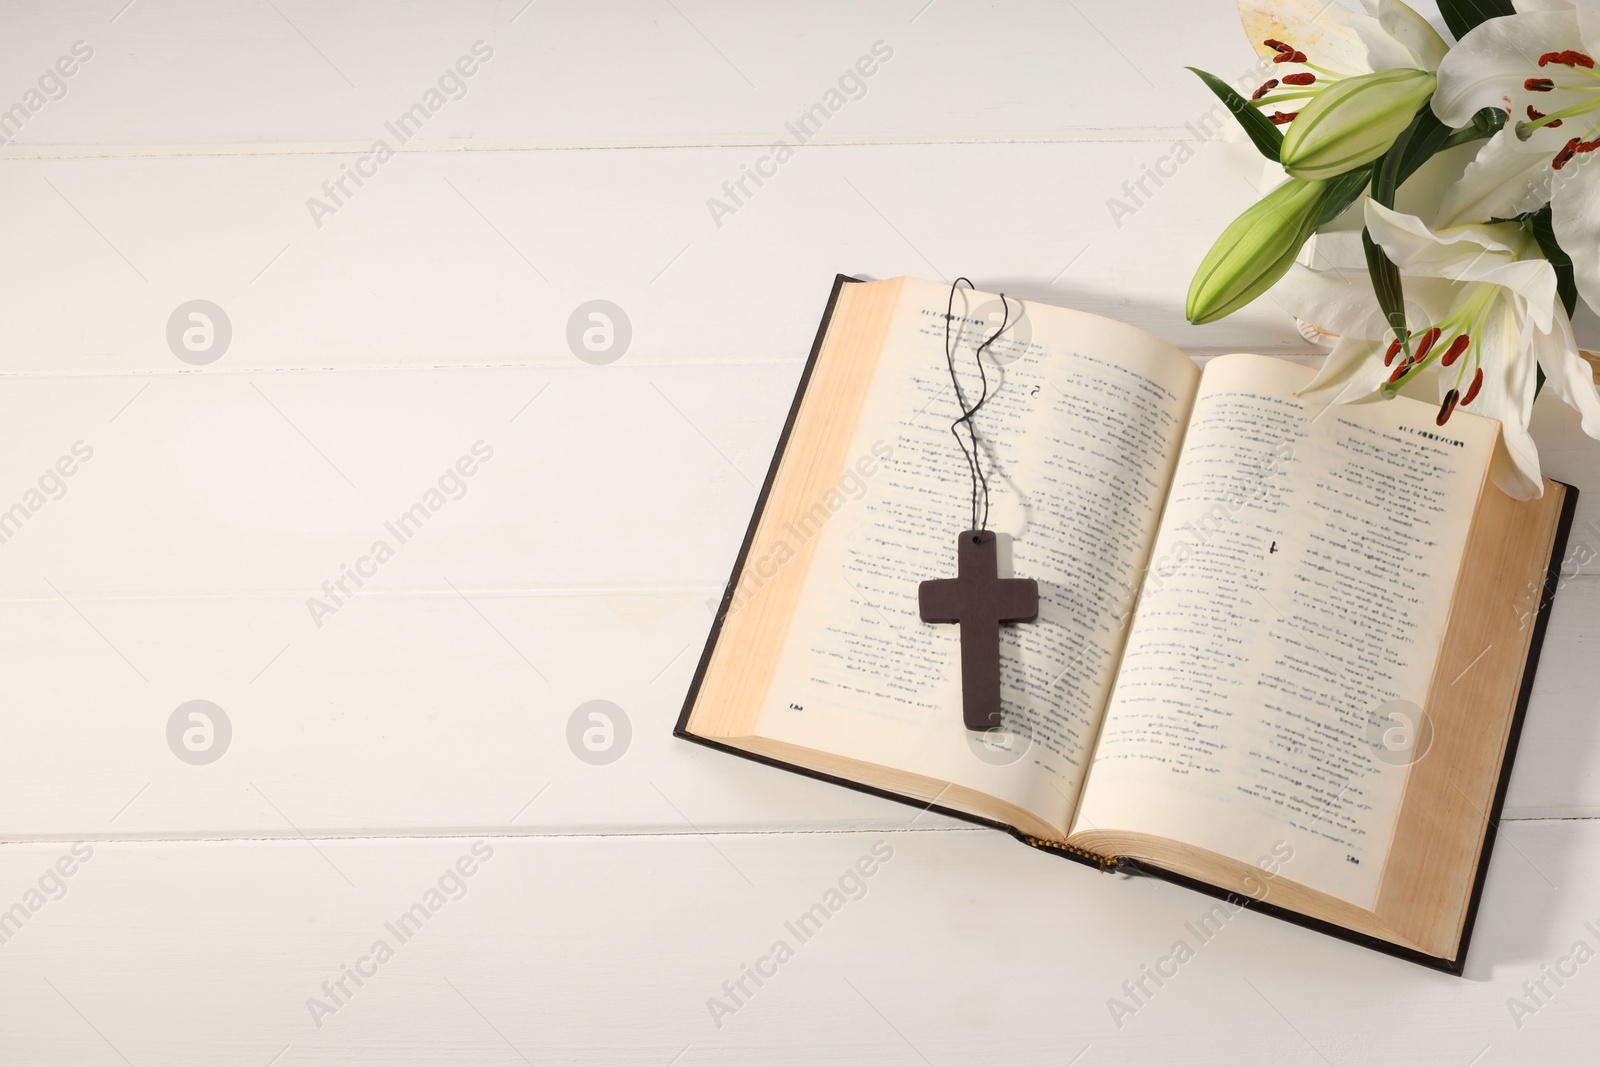 Photo of Cross, Bible and beautiful lily flowers on white wooden table, flat lay with space for text. Religion of Christianity